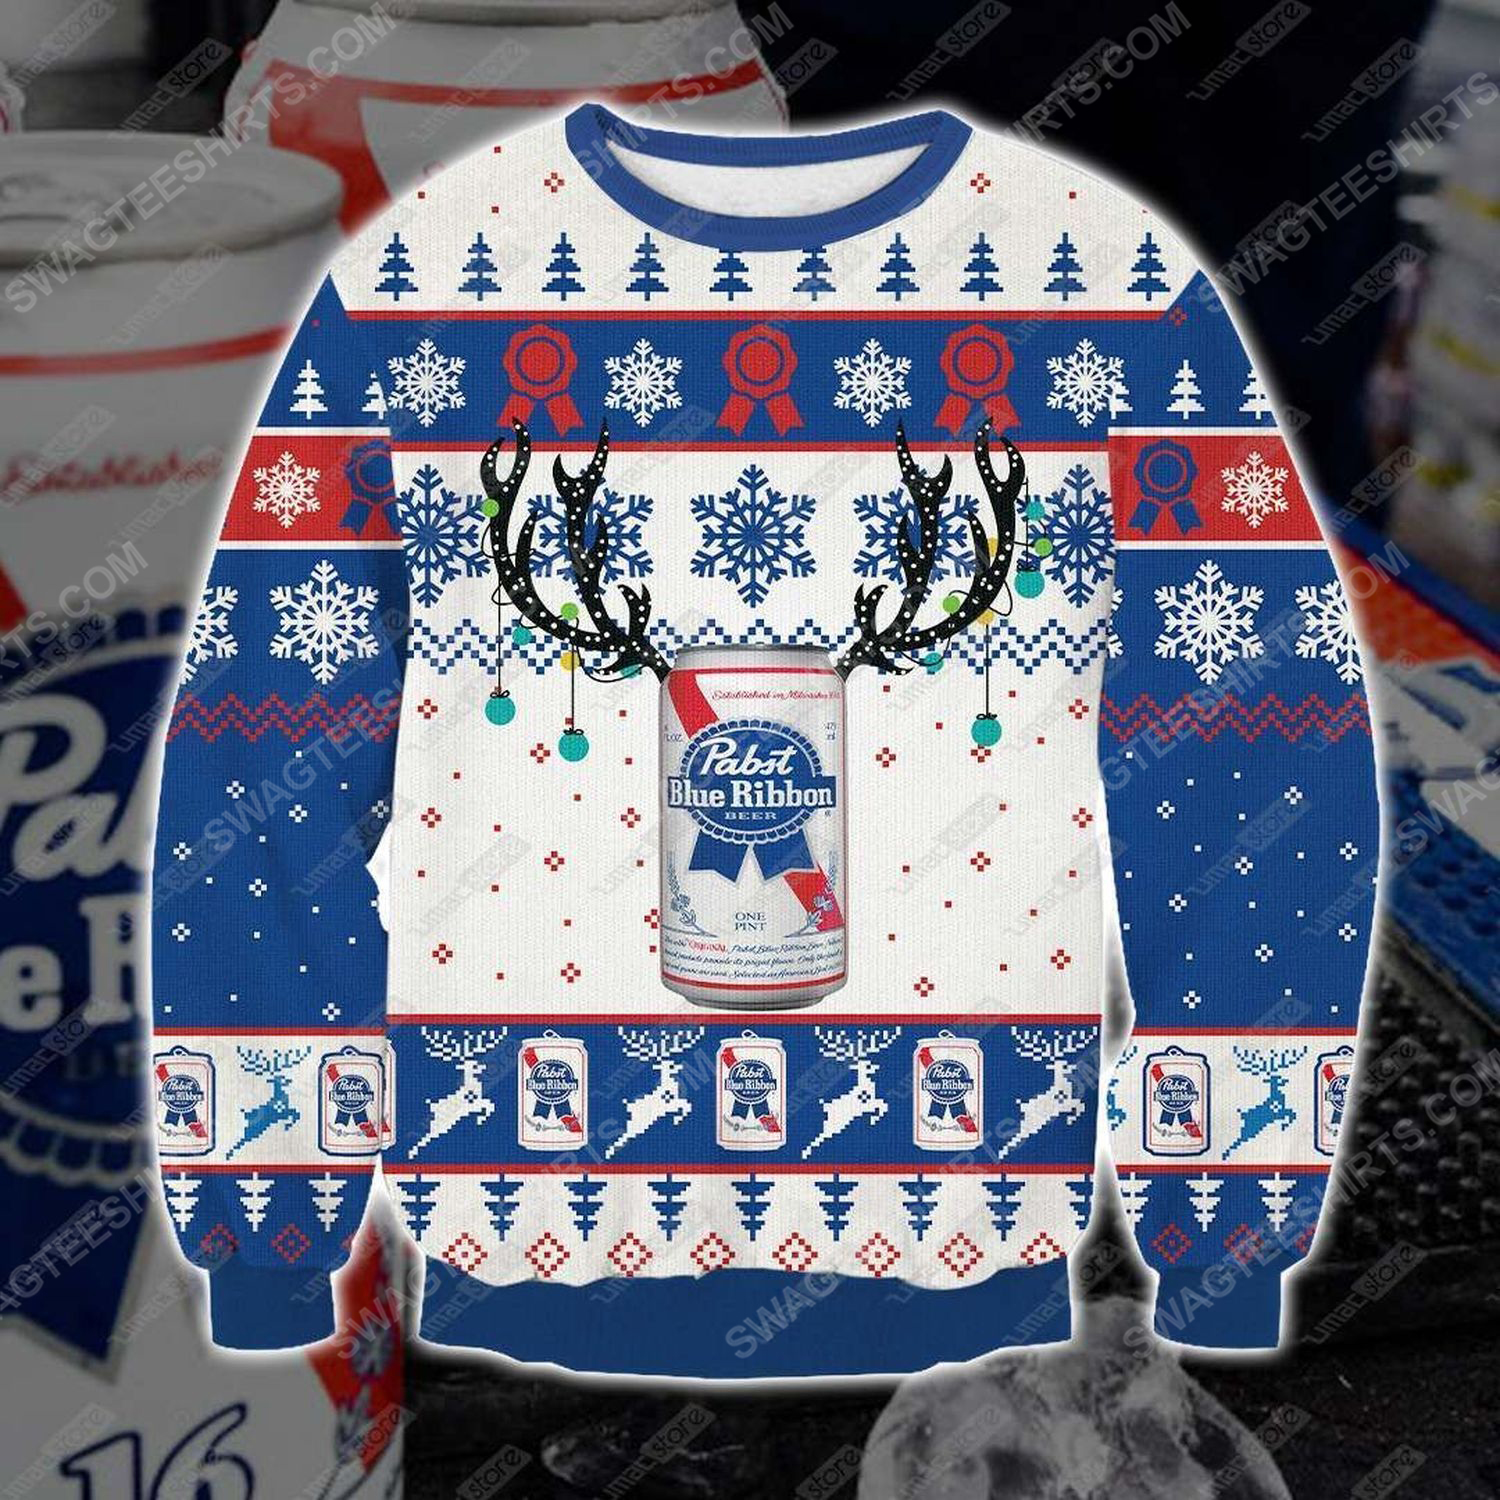 [special edition] Pabst blue ribbon beer ugly christmas sweater – maria